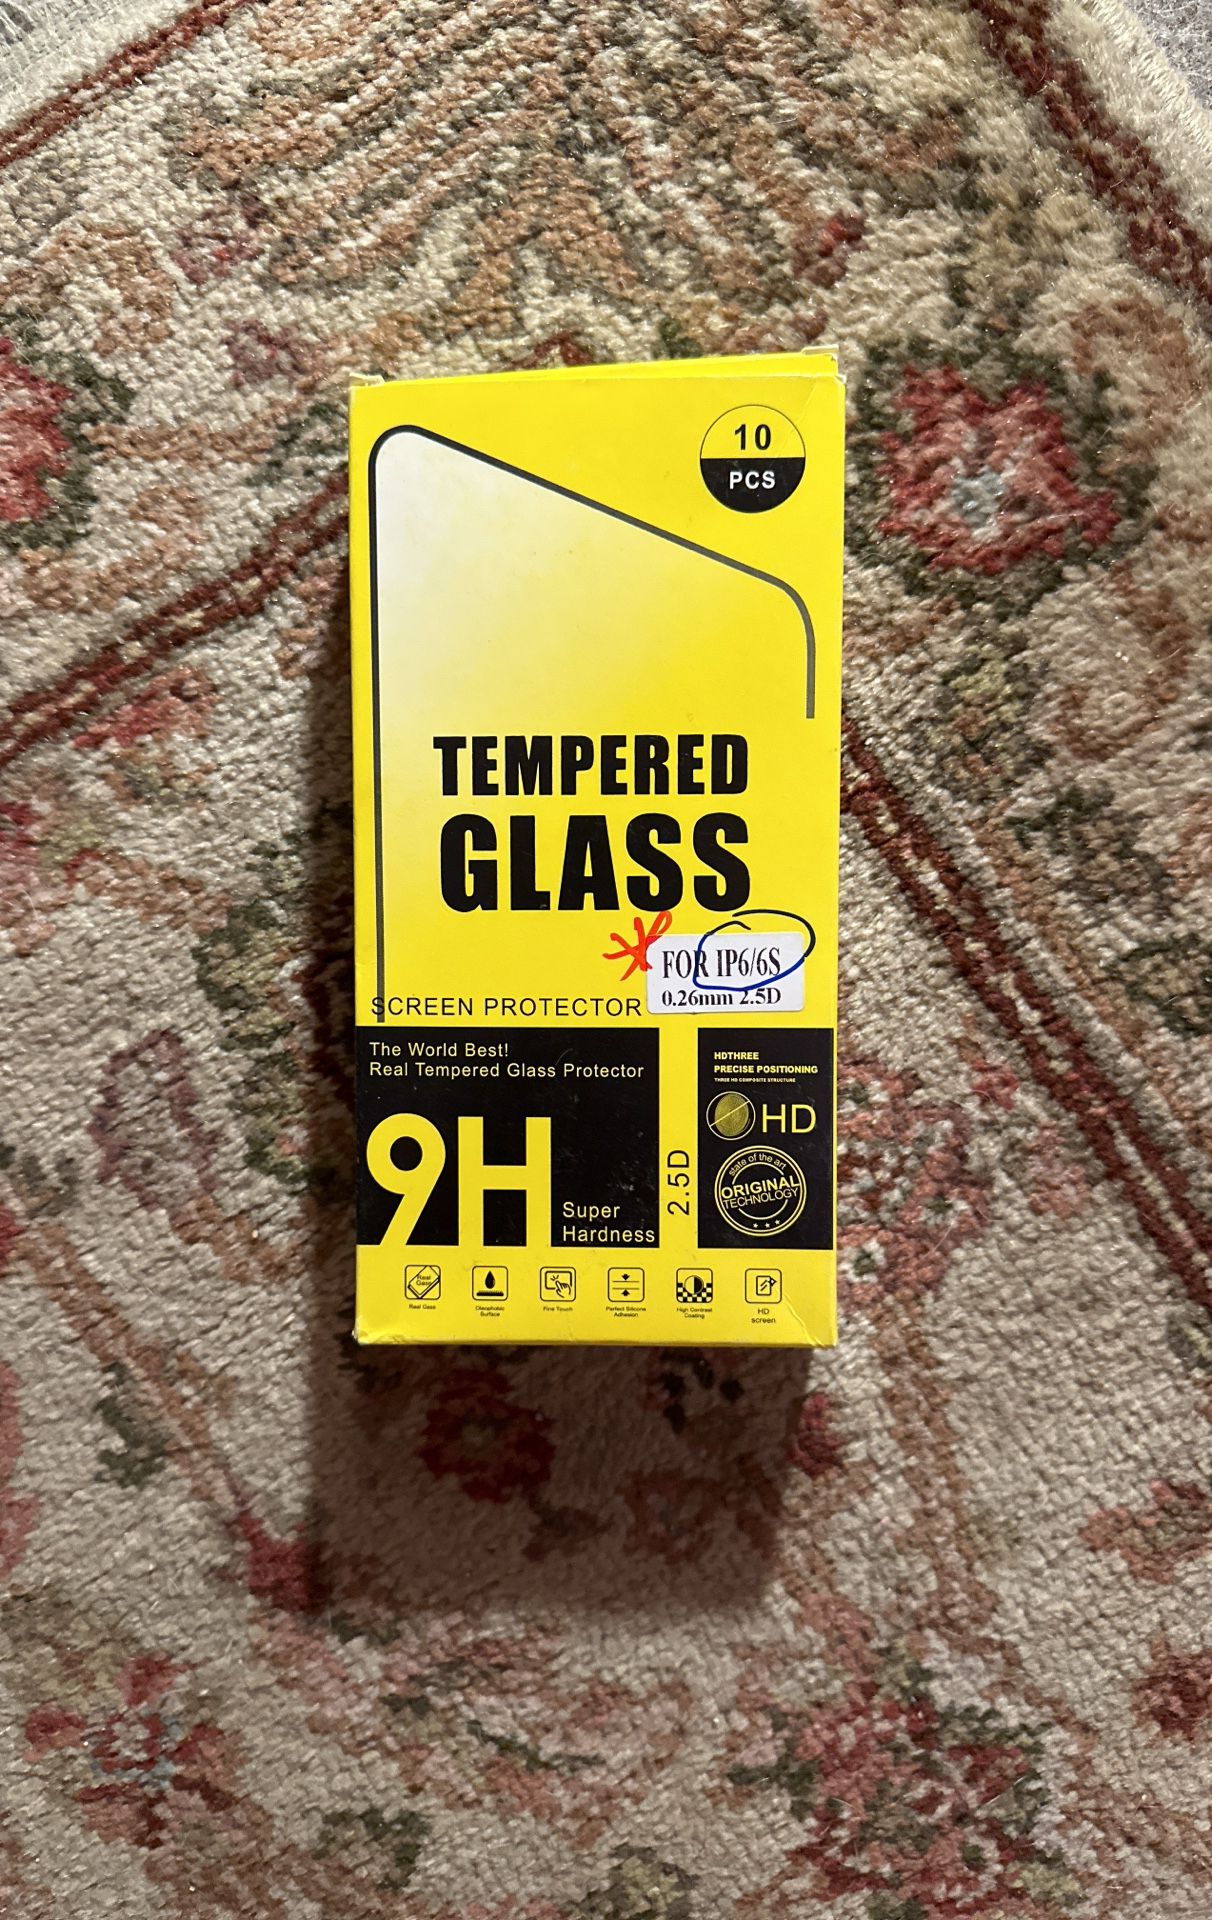 Tempered glass, Screen protector For iPhone 6,SE, 6, Or 6S 